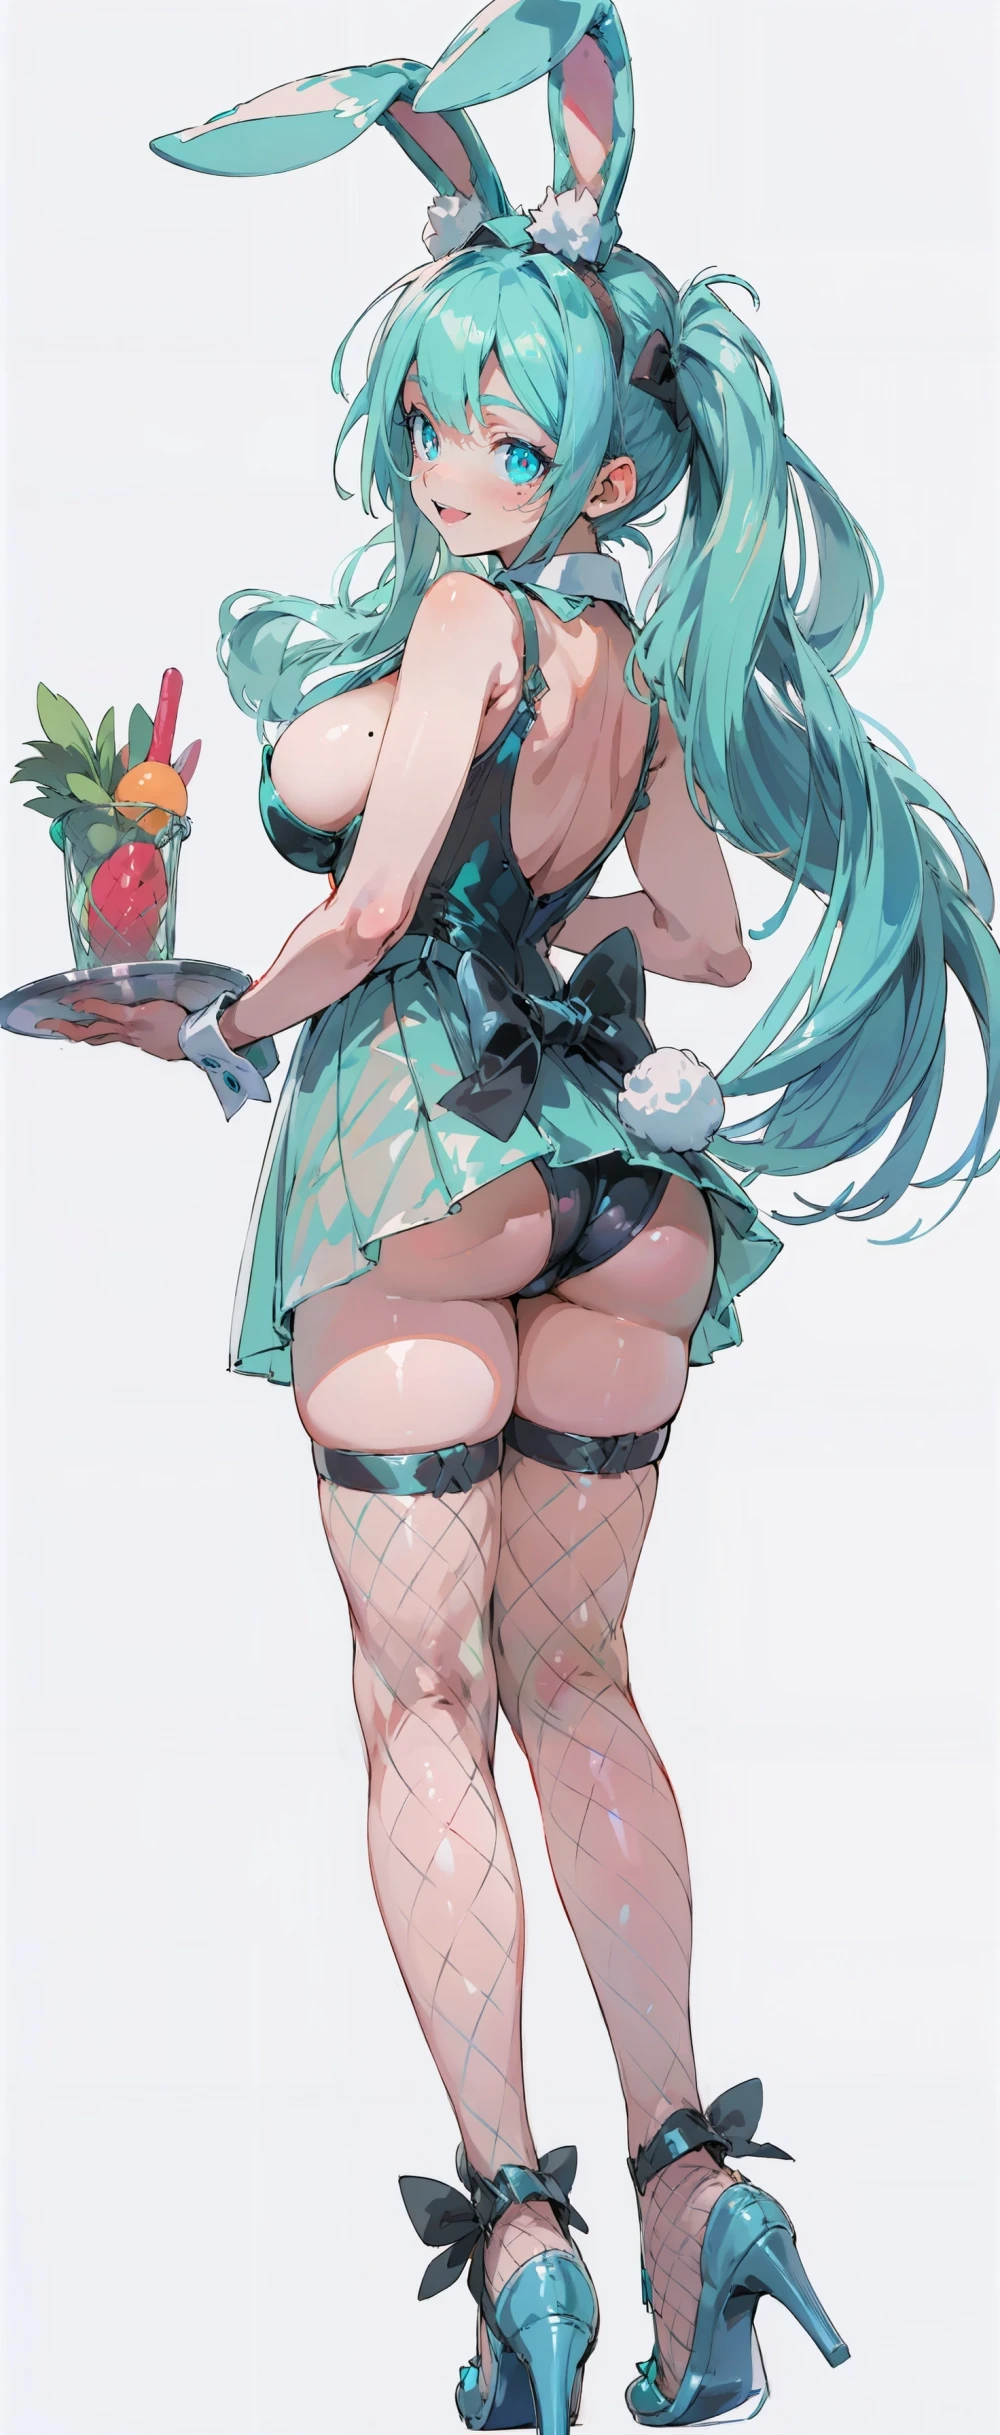 hatsune-miku-anime-style-all-ages-2-31